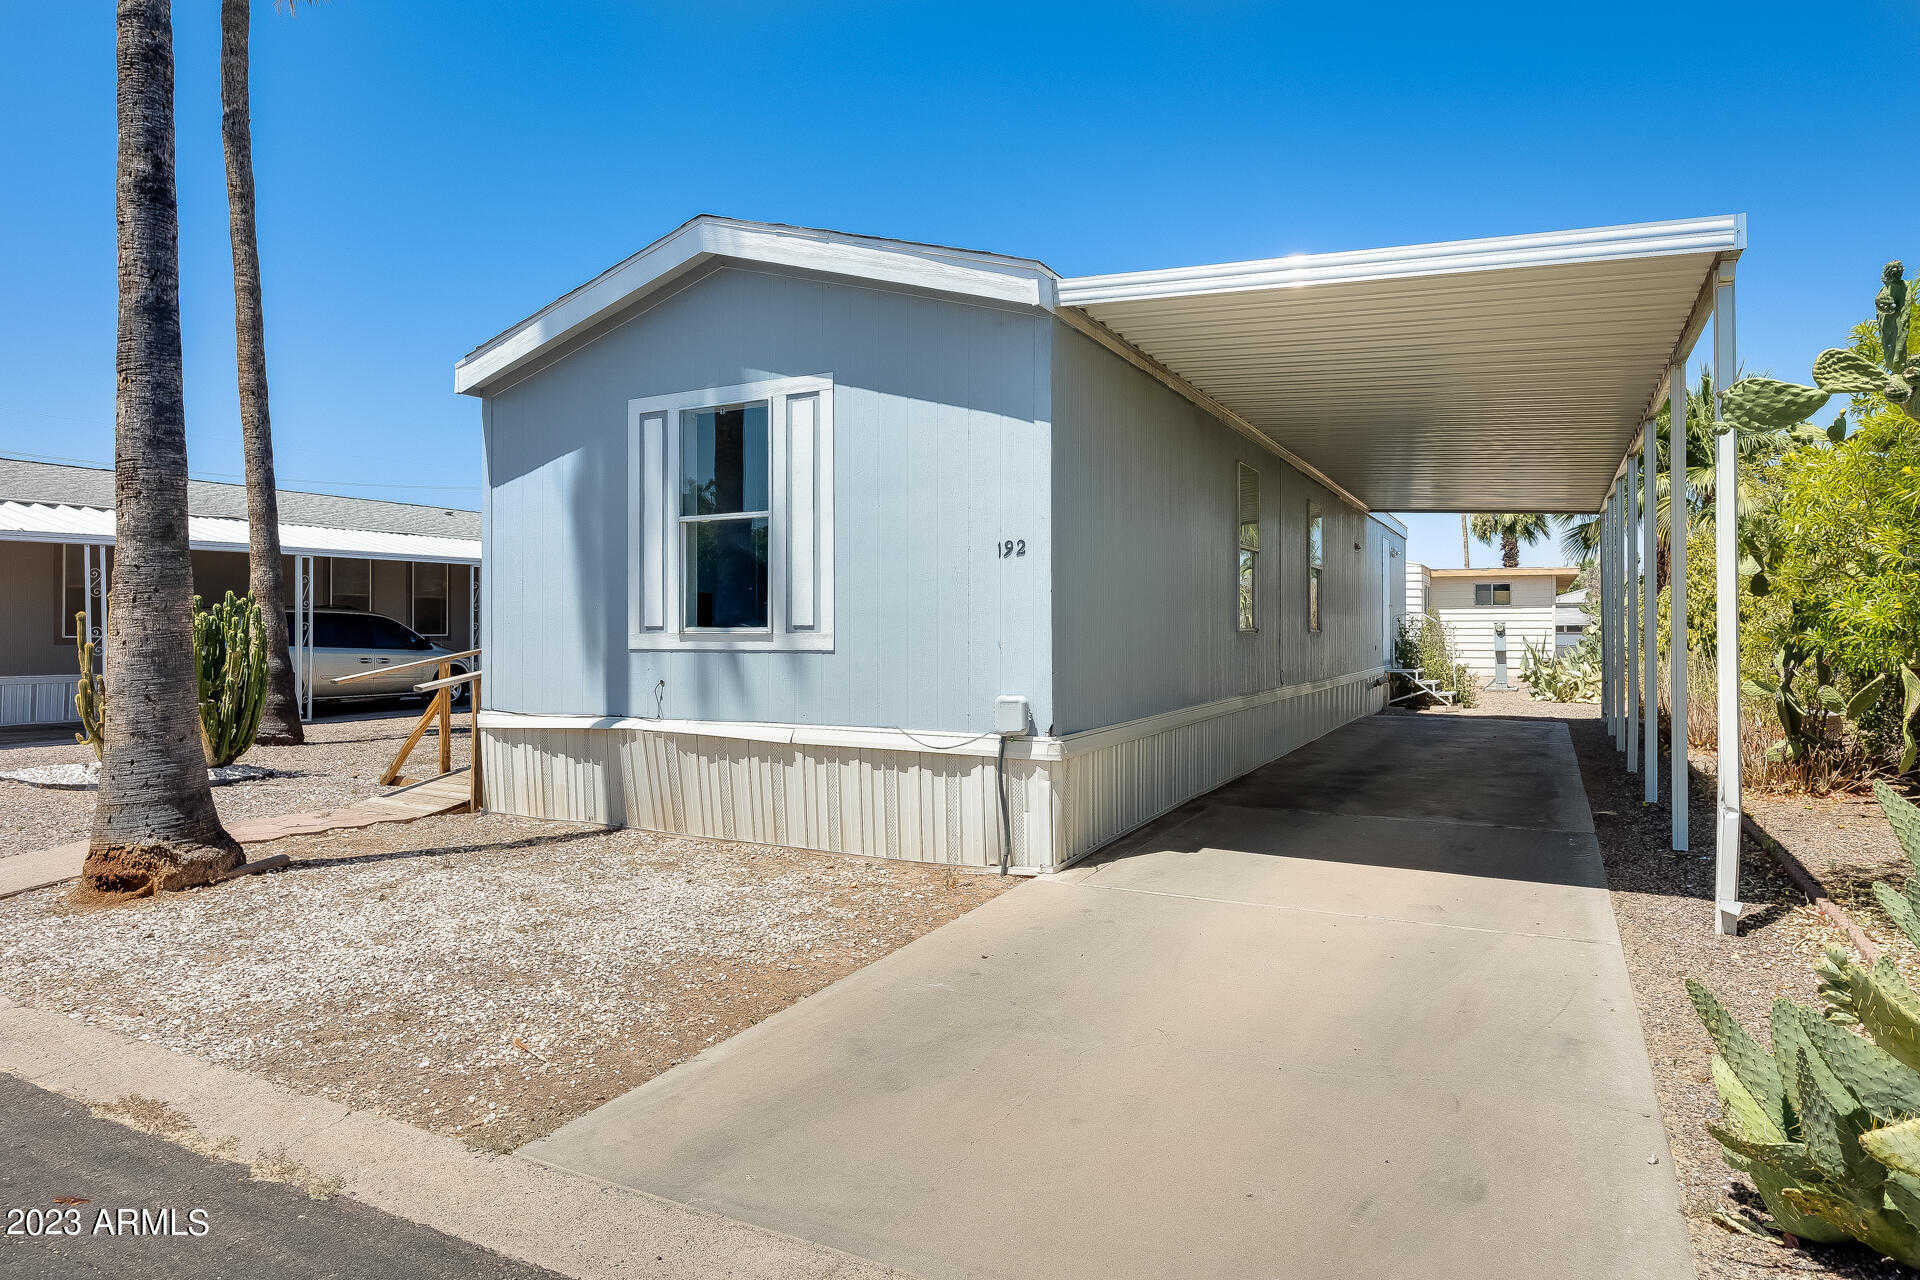 Photo 1 of 32 of 2650 W Union Hills Drive Unit 192 mobile home